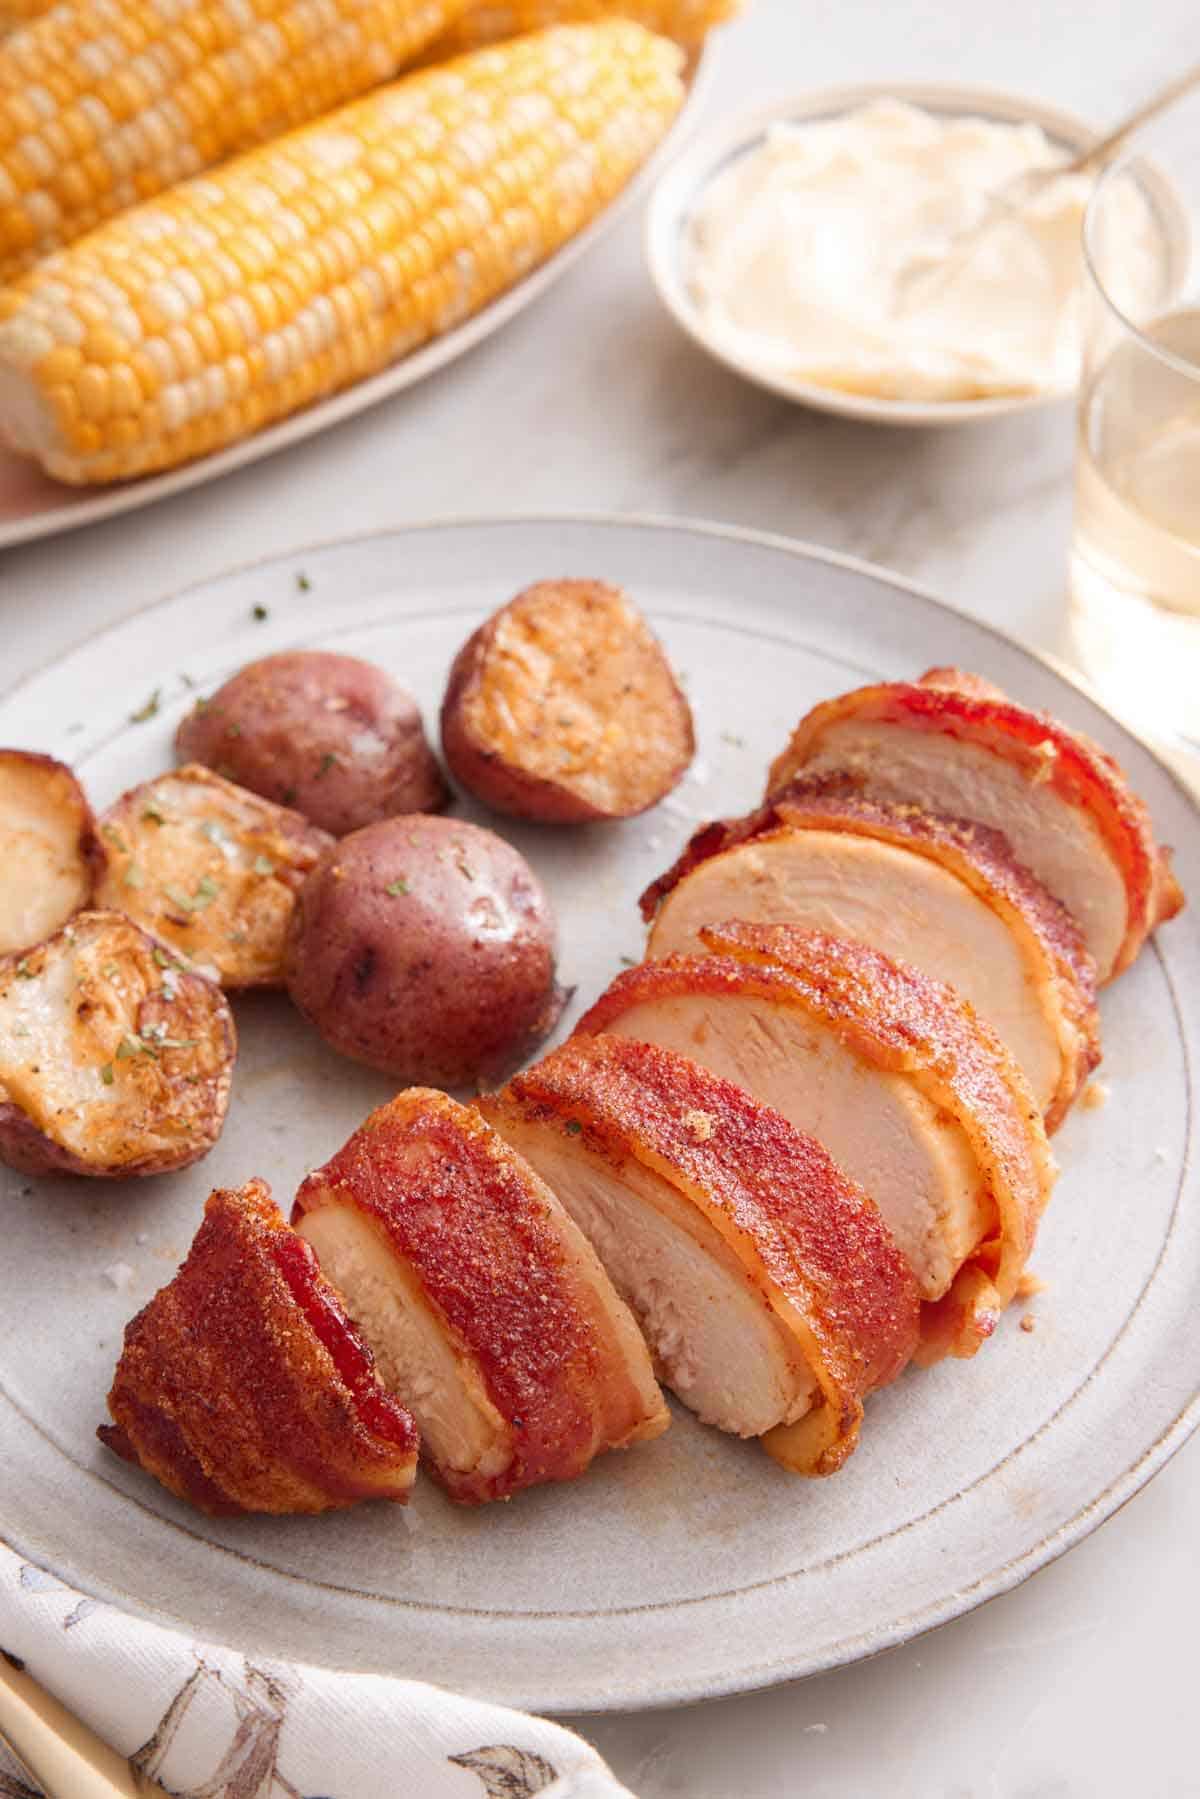 A plate with a serving of bacon wrapped chicken sliced into bite-sized pieces with a side of baby potatoes.